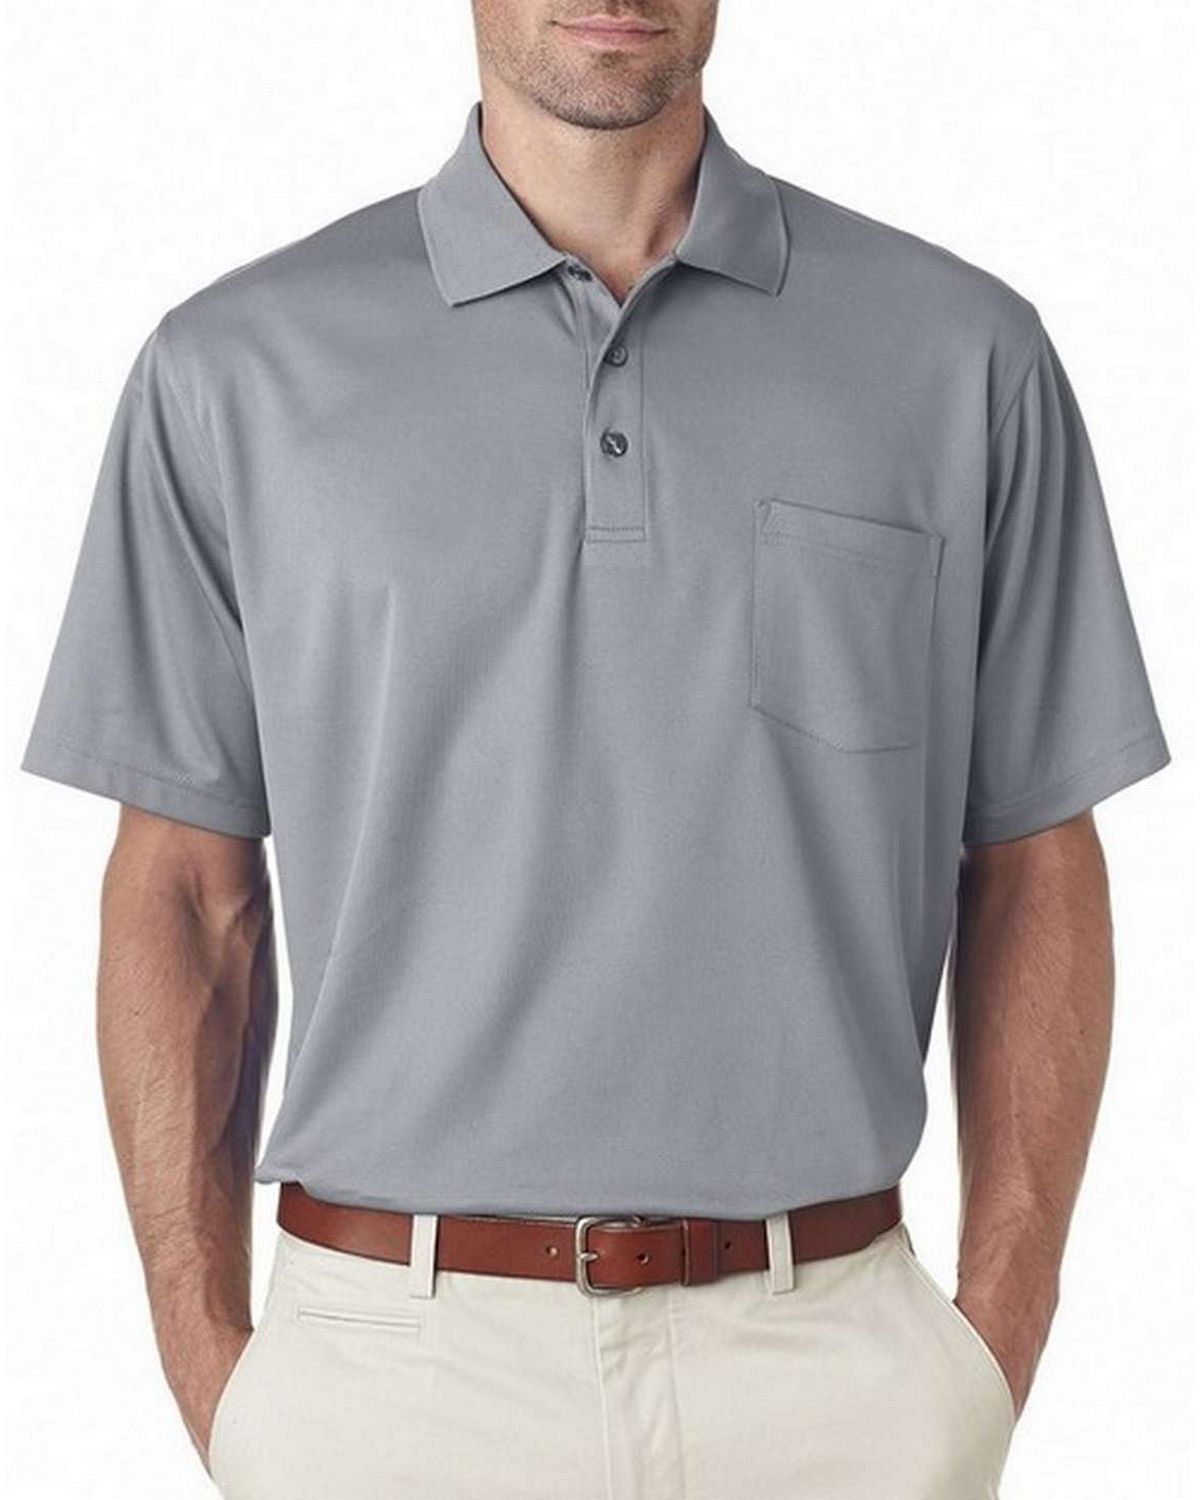 Ultraclub 8210P Adult Cool  Dry Mesh Pique Polo with Pocket